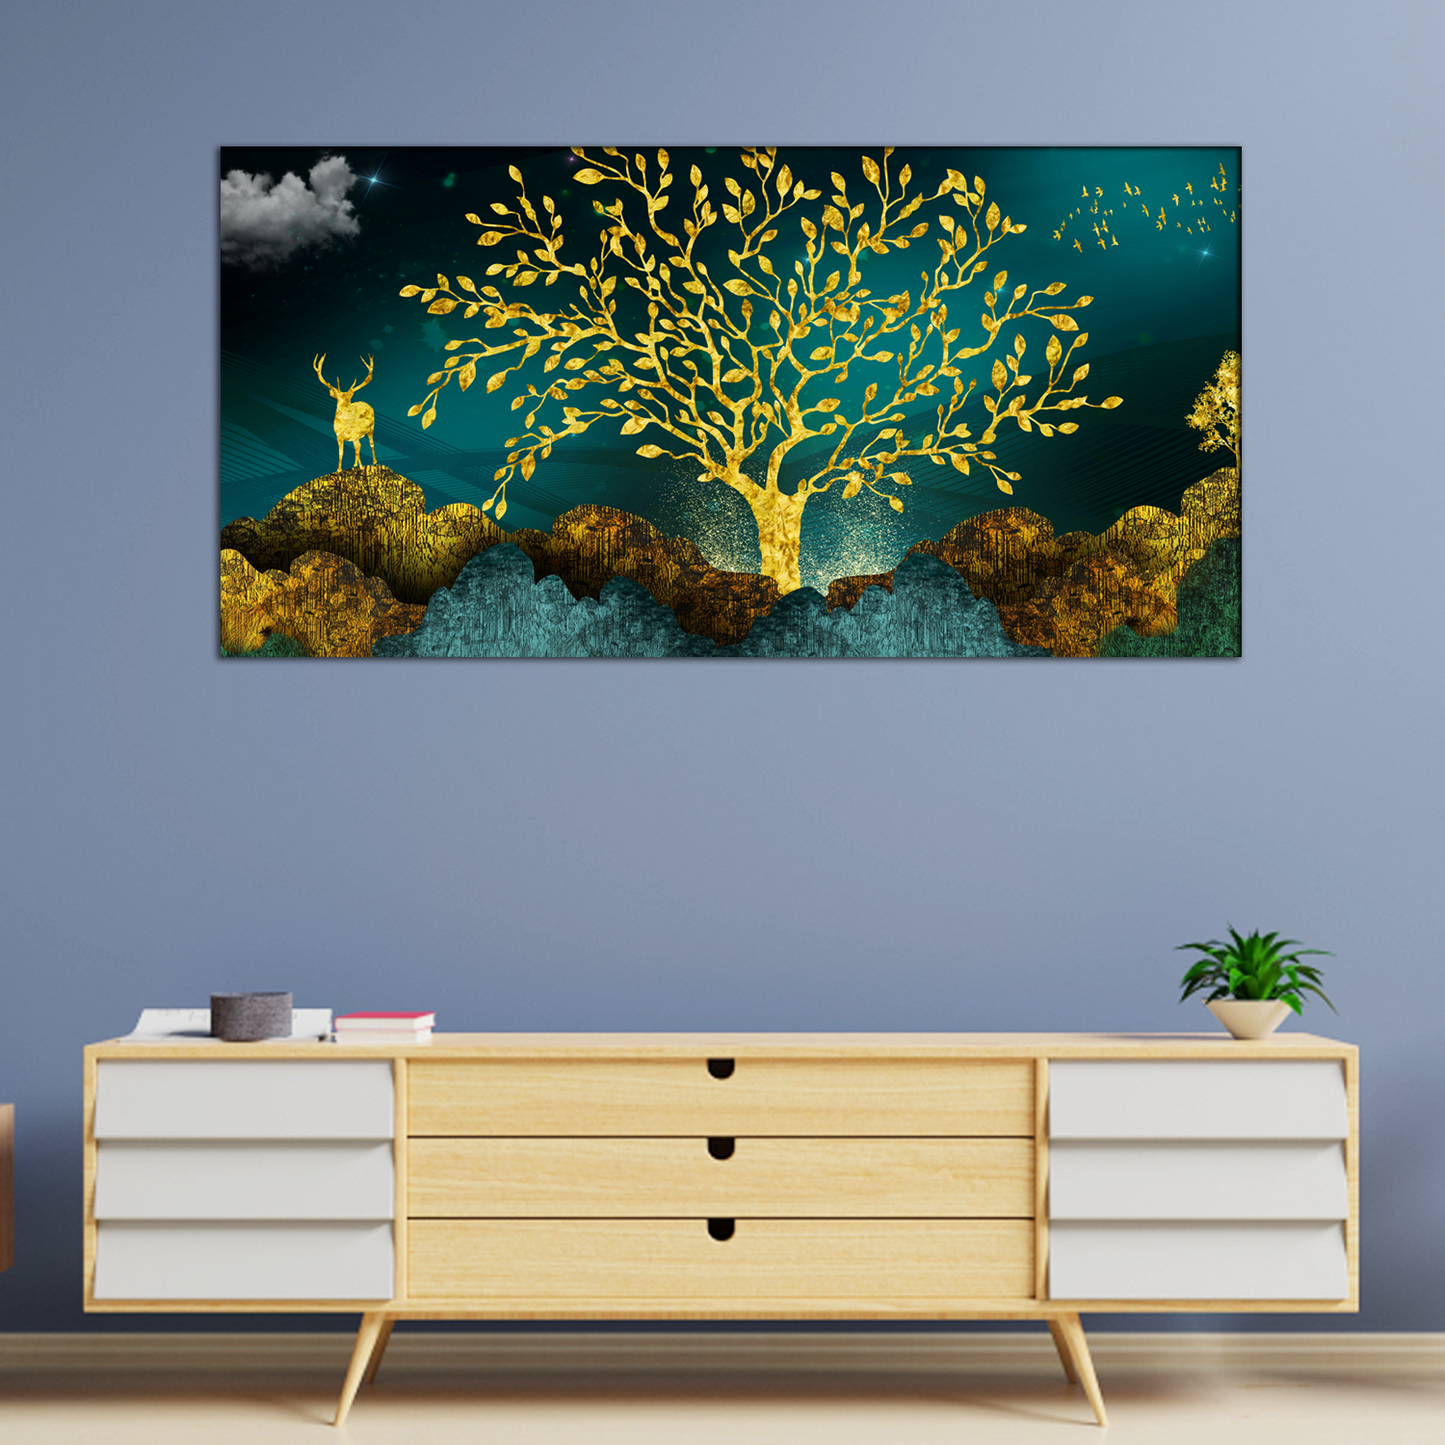 Golden Trees and Deer with Hills Canvas Print Wall Painting